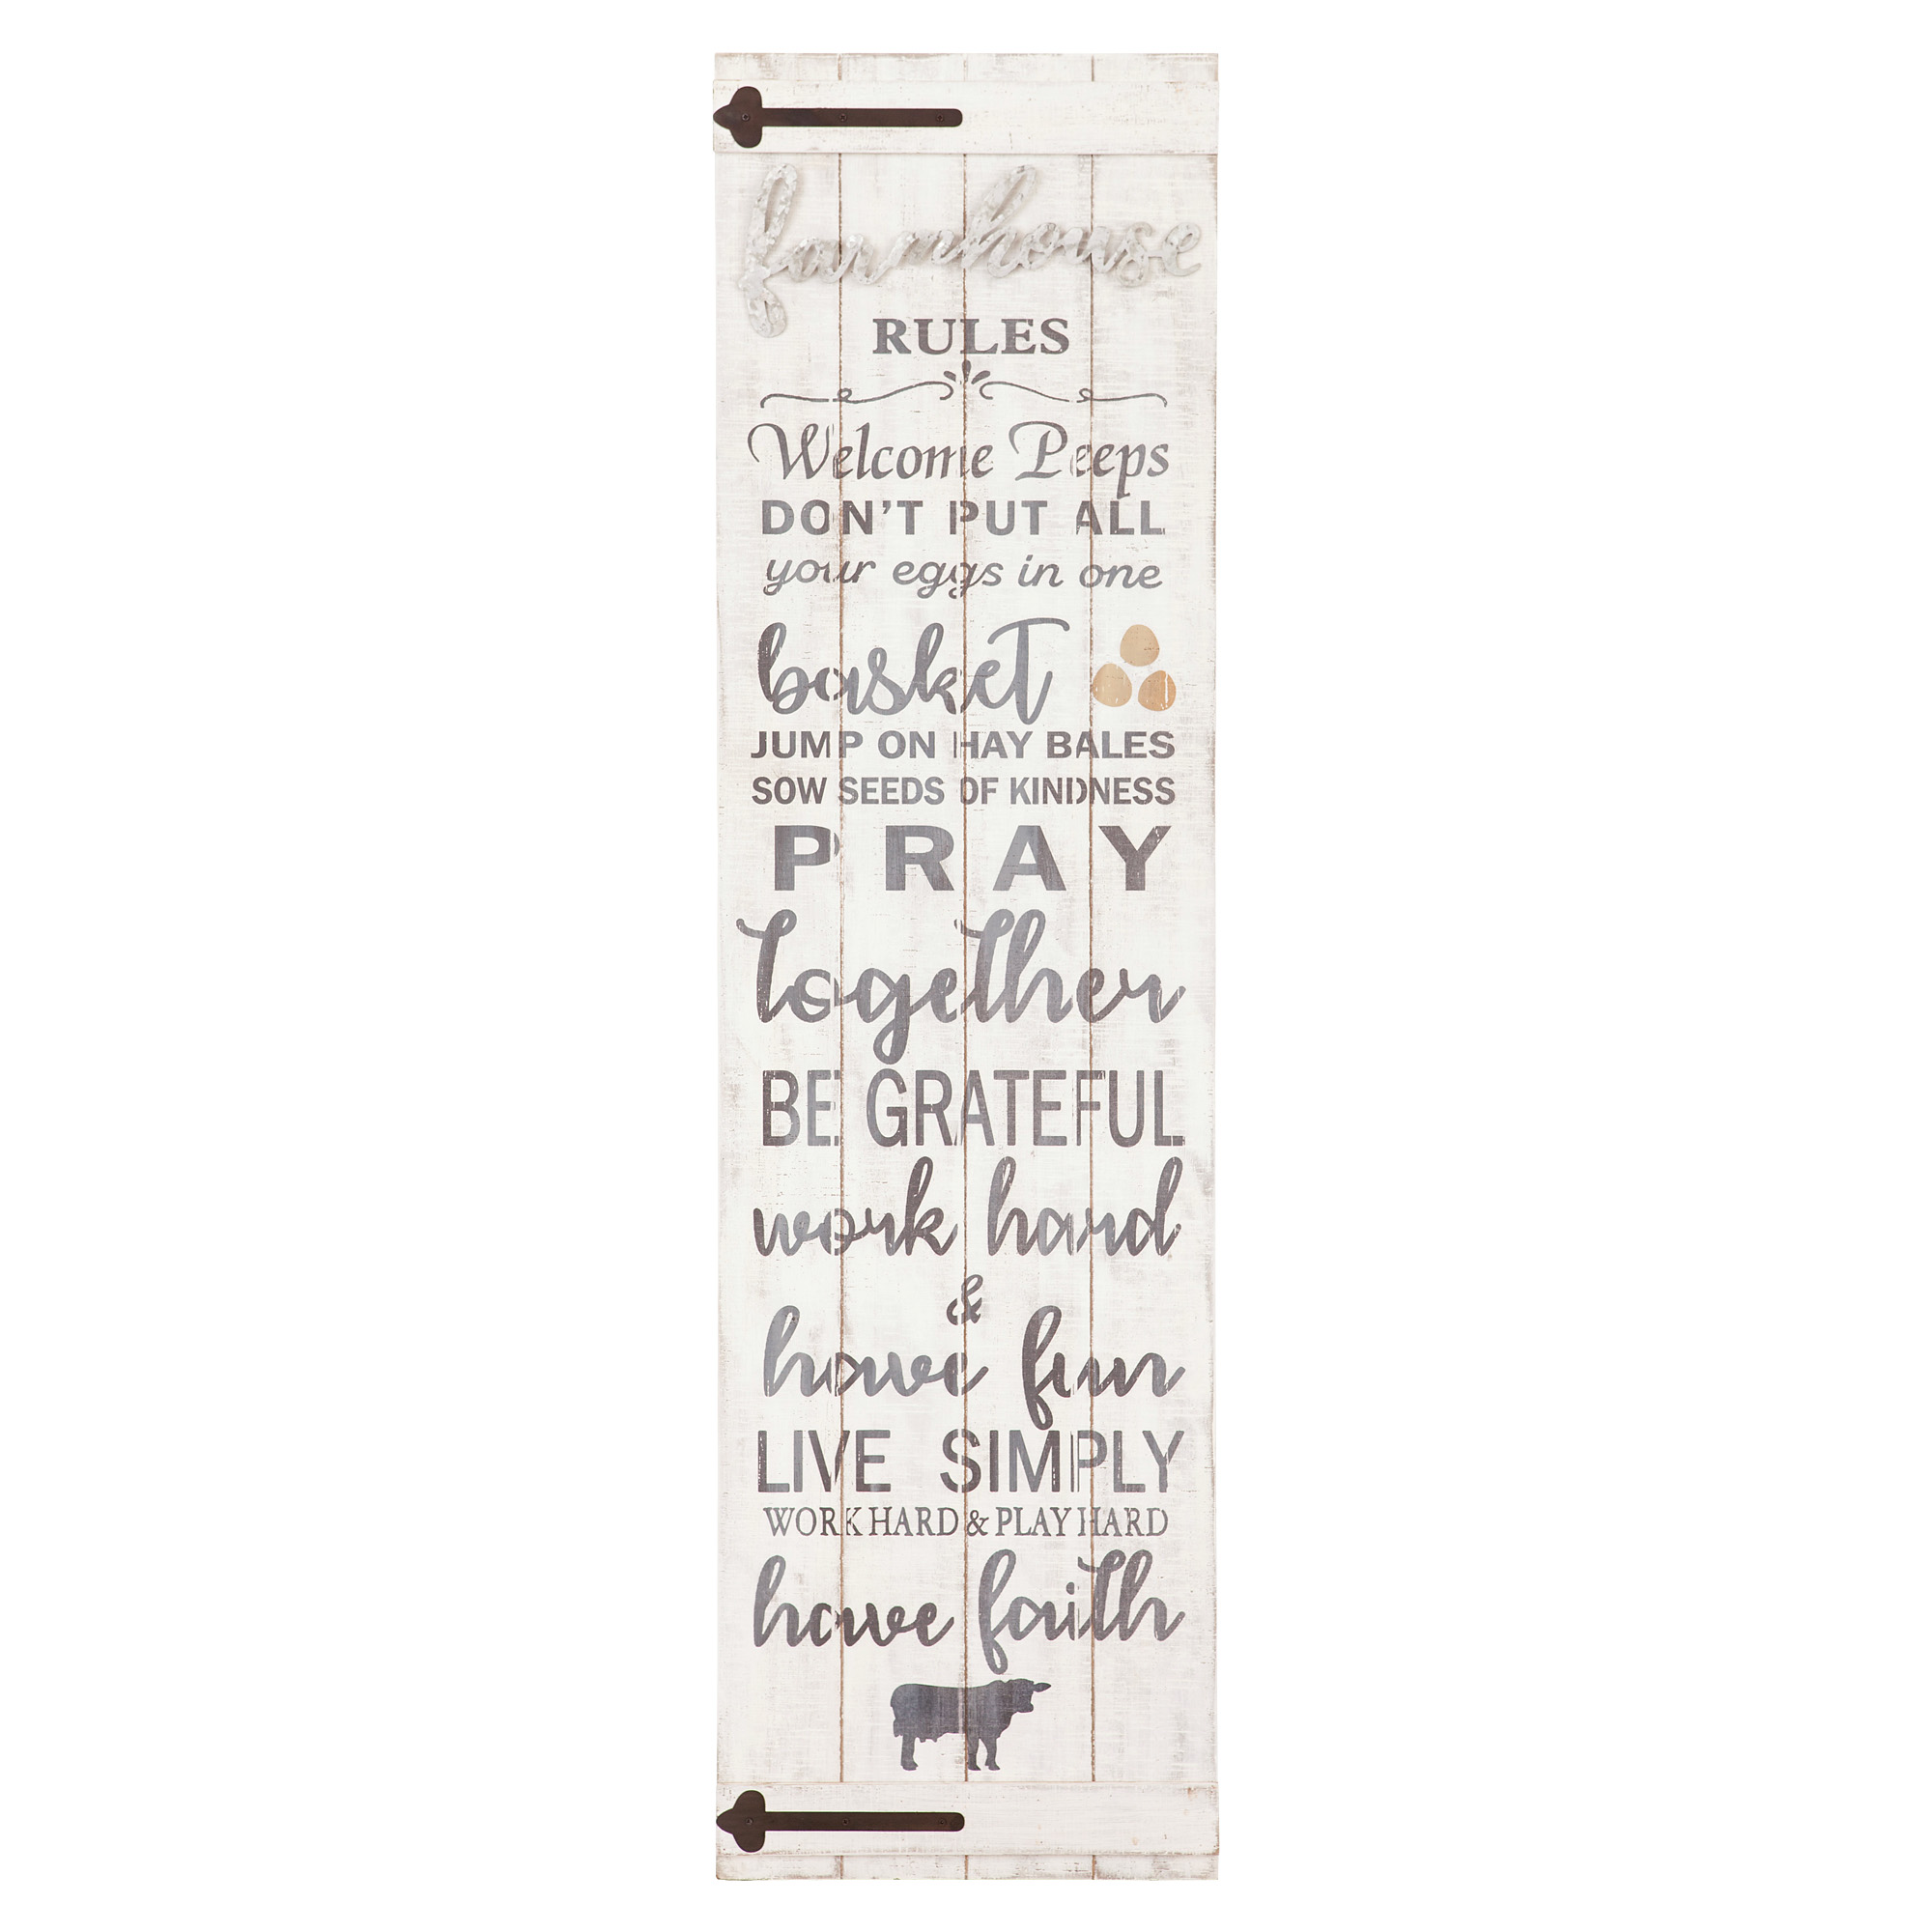 Patton Wall Decor Farmhouse Rules Classic Vintage Traditional Transitional Rustic Metal Wall Signs - image 1 of 6